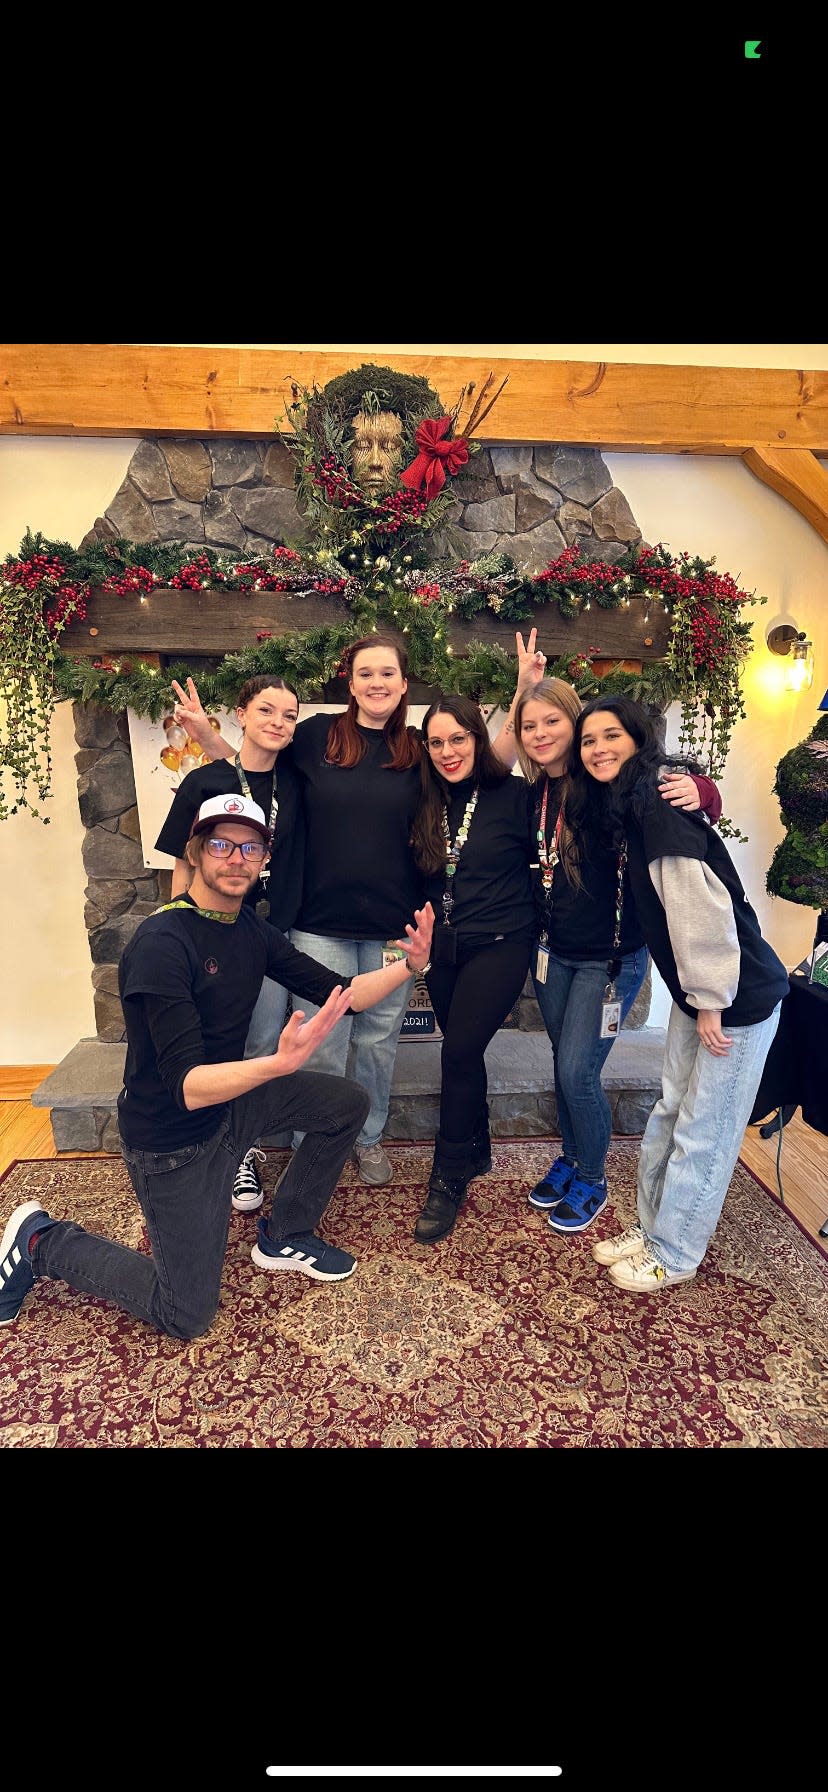 The staff of the Bud Barn in Winchendon celebrates one year in business. From left, Jameson Howard (kneeling), Hana Knowlton, Emily Mount, Melissa Murphy, Karlie Allen, and Mena Salame.